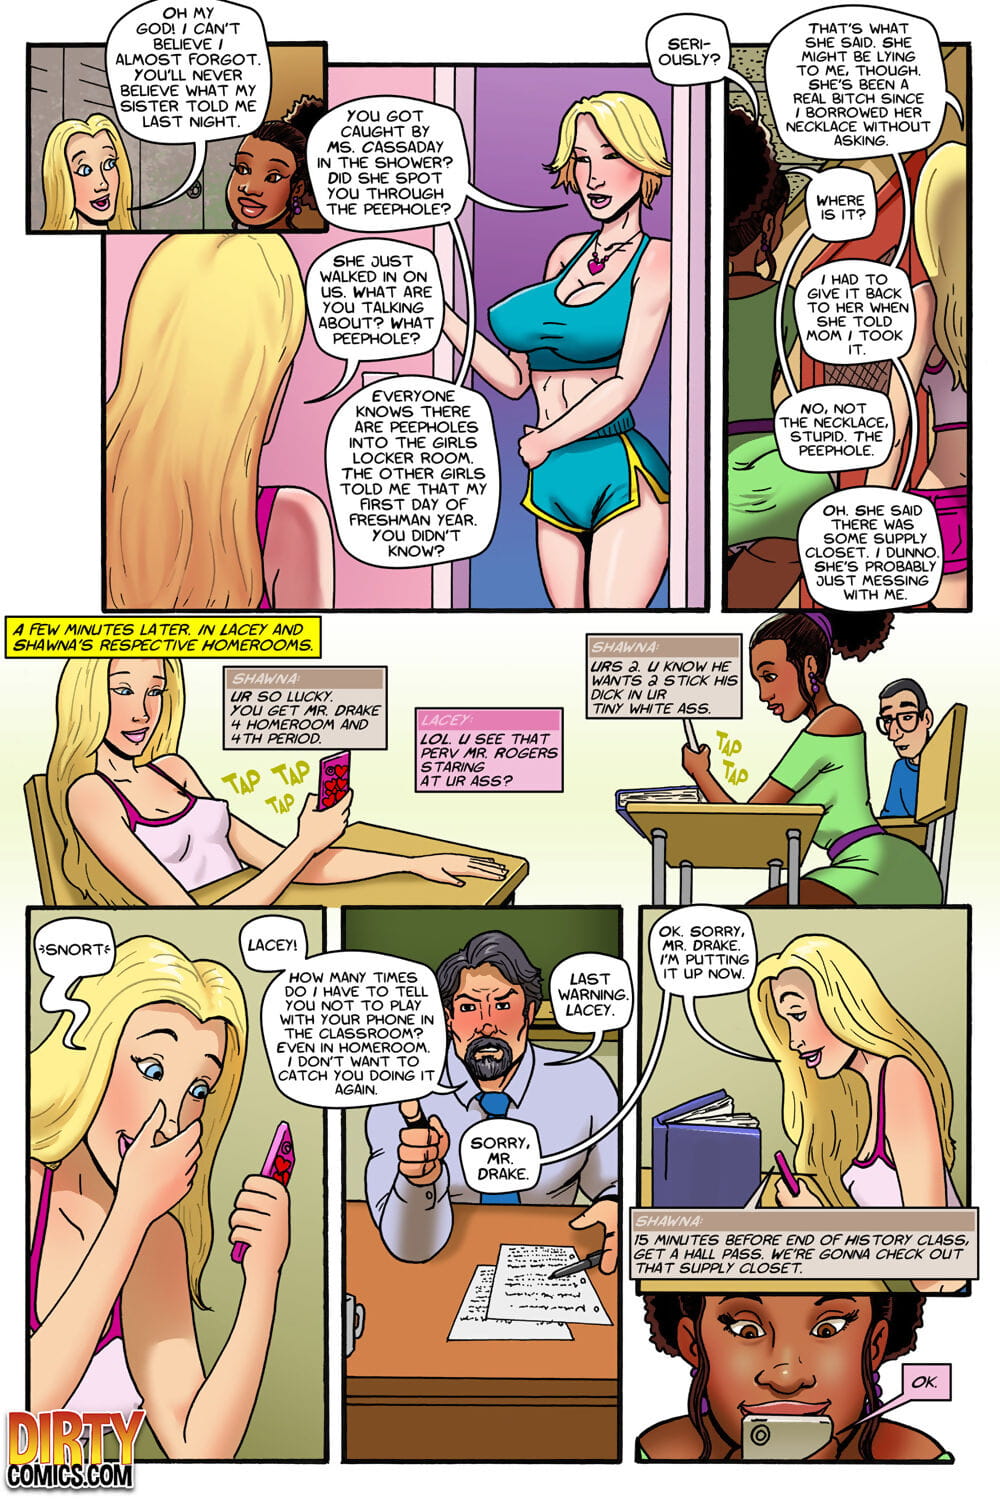 Karmagik- Moose- Very Physical Education Issue 2 page 1